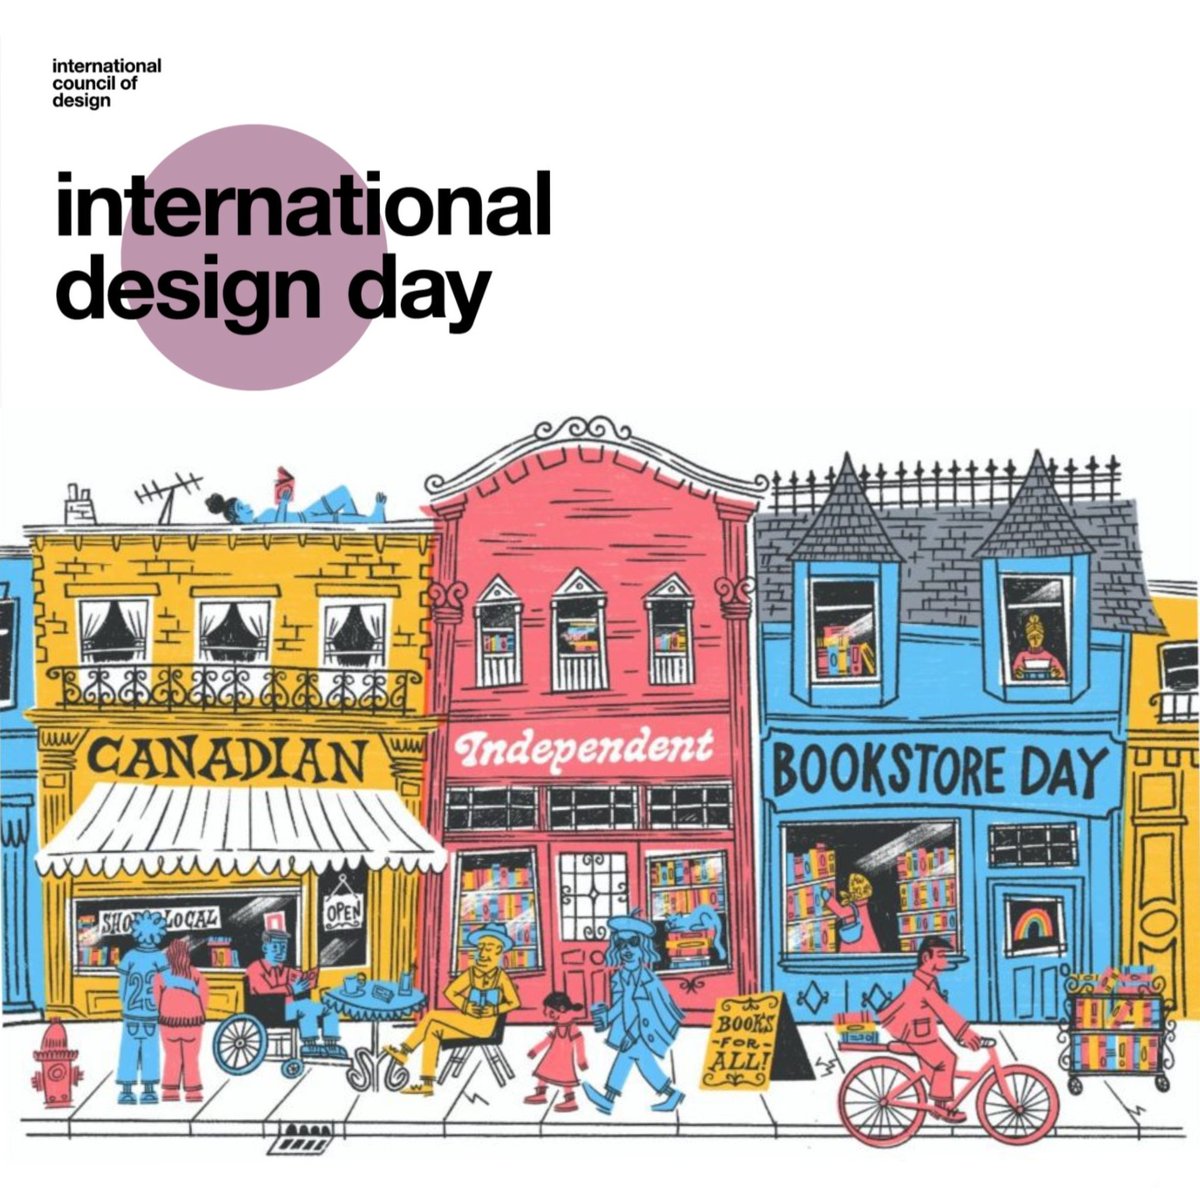 Today is International Design Day (formerly known as World Graphics Day, commemorating the founding of the International Council of Design in 1963) and Canadian Independent Bookstore Day, so please go buy beautifully designed books at your local bookshop.